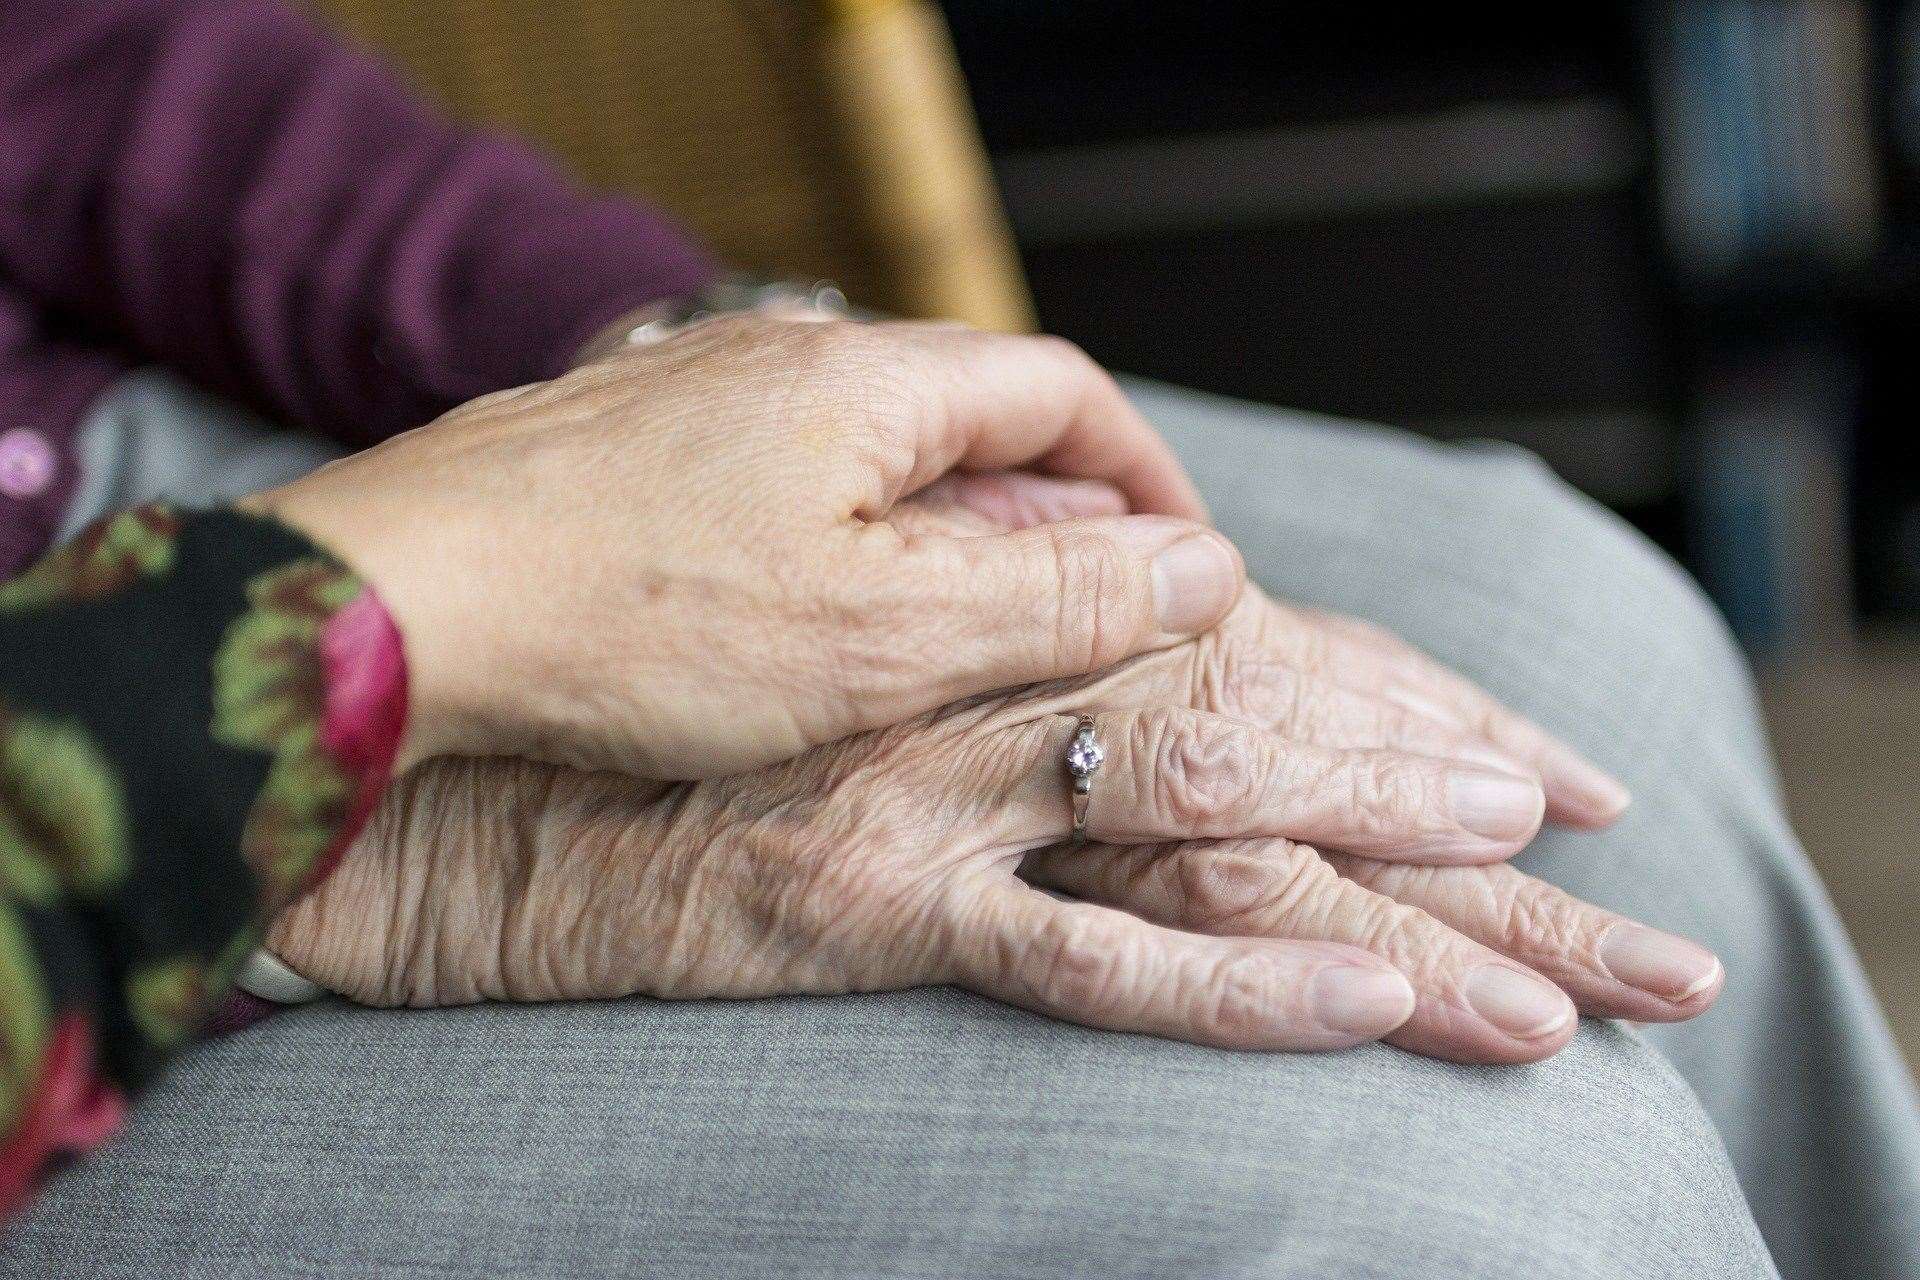 Residents living in care homes across Kent seem to think staff getting the jab is a good idea. Picture: Pixabay